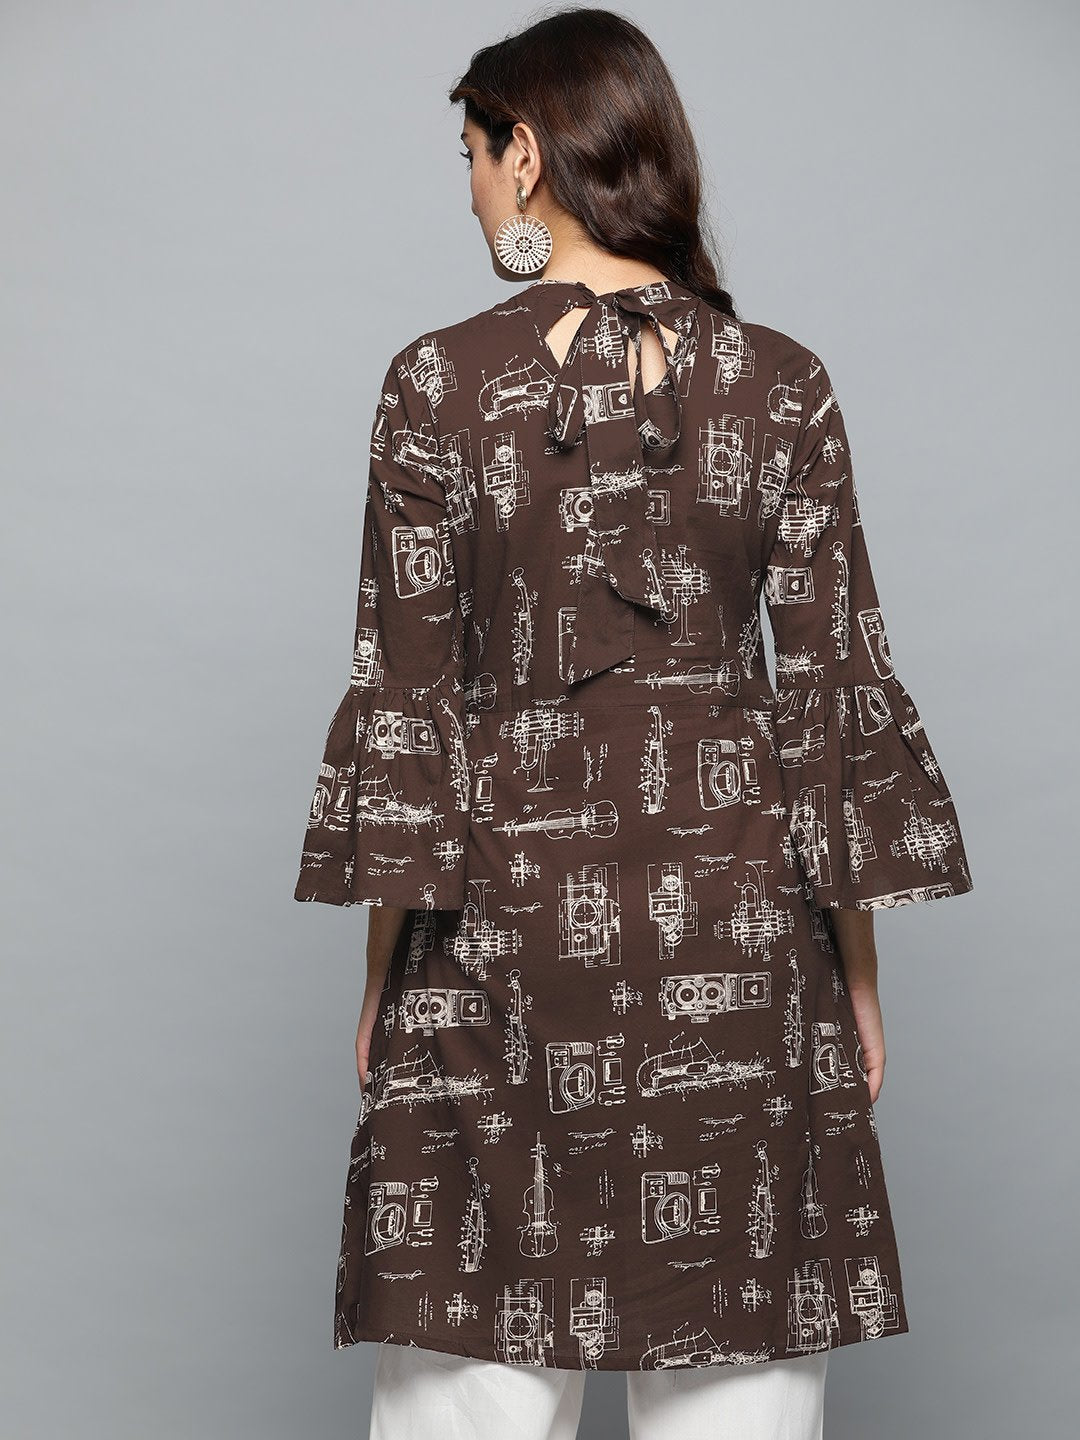 Women's Brown Printed A-Line Dress With Roll Collar & Flared Sleeves - Nayo Clothing